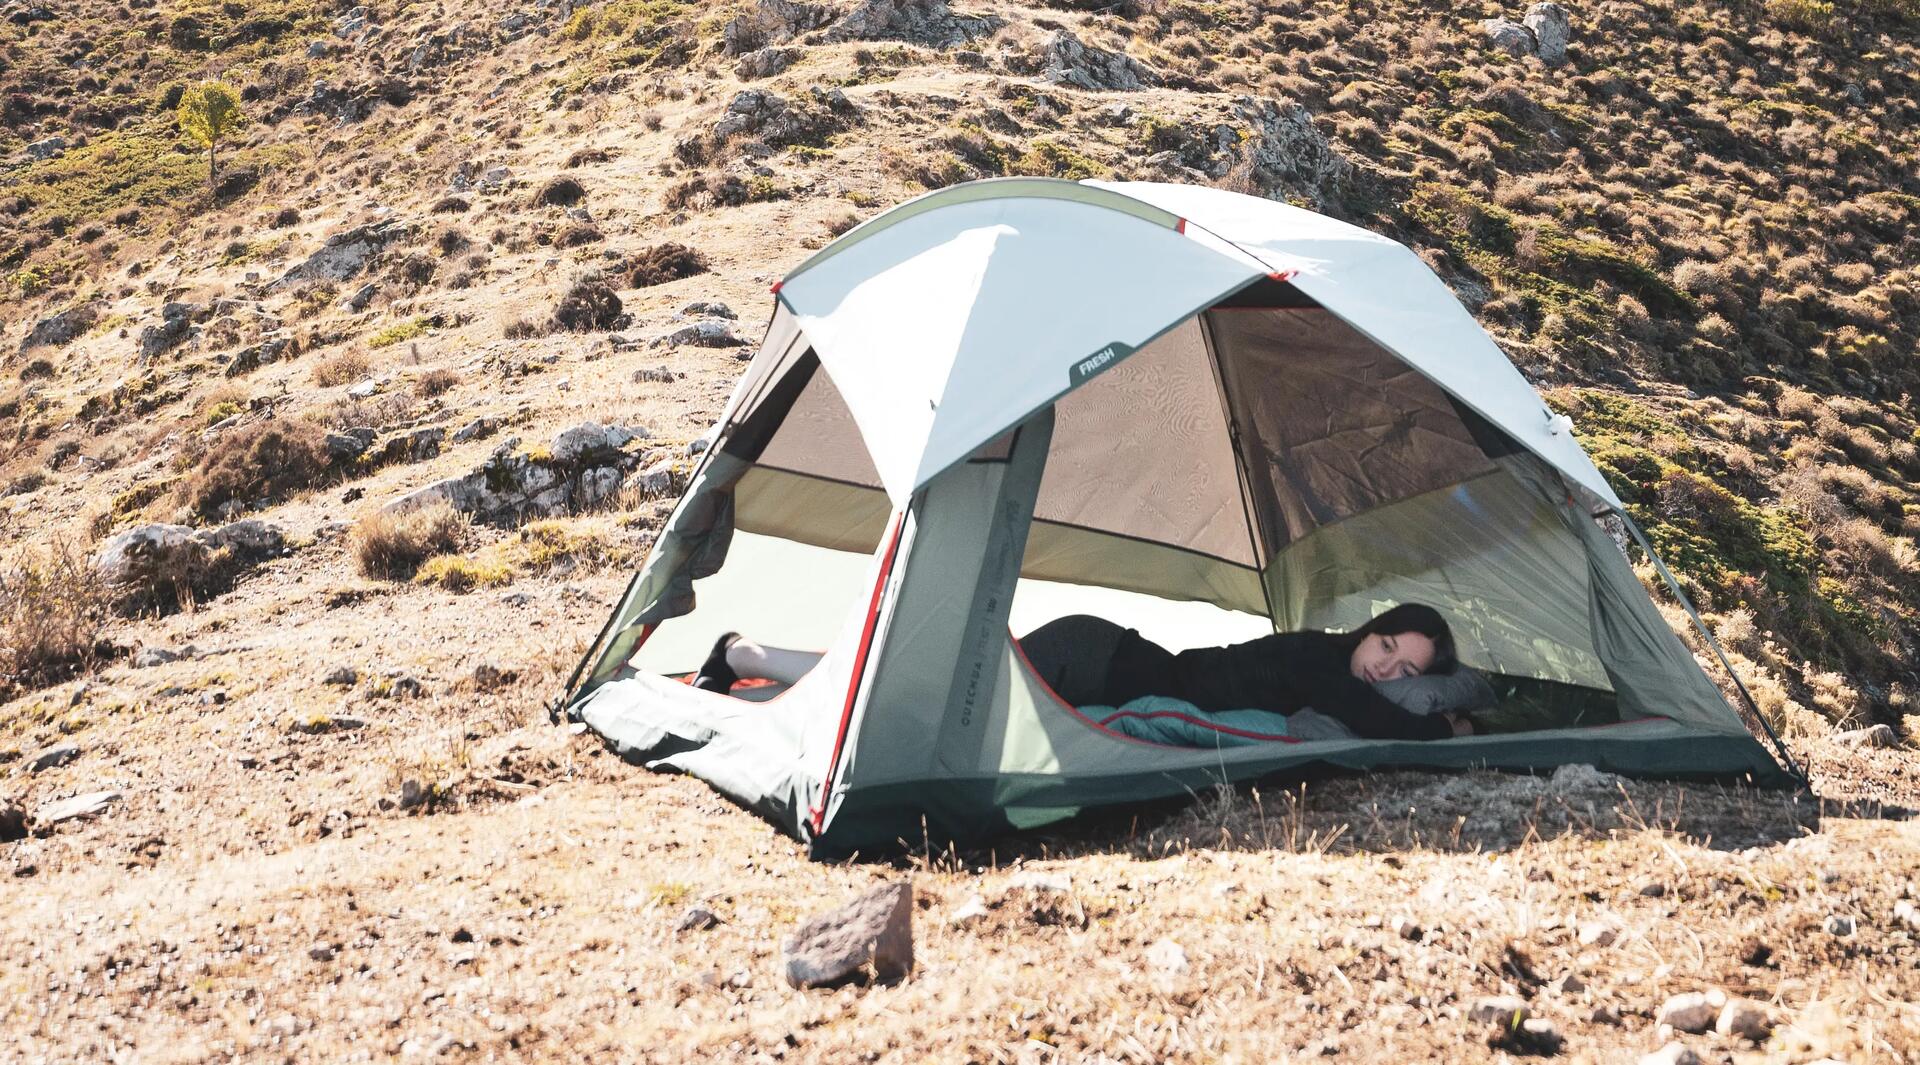 The most ventilated tent for summer